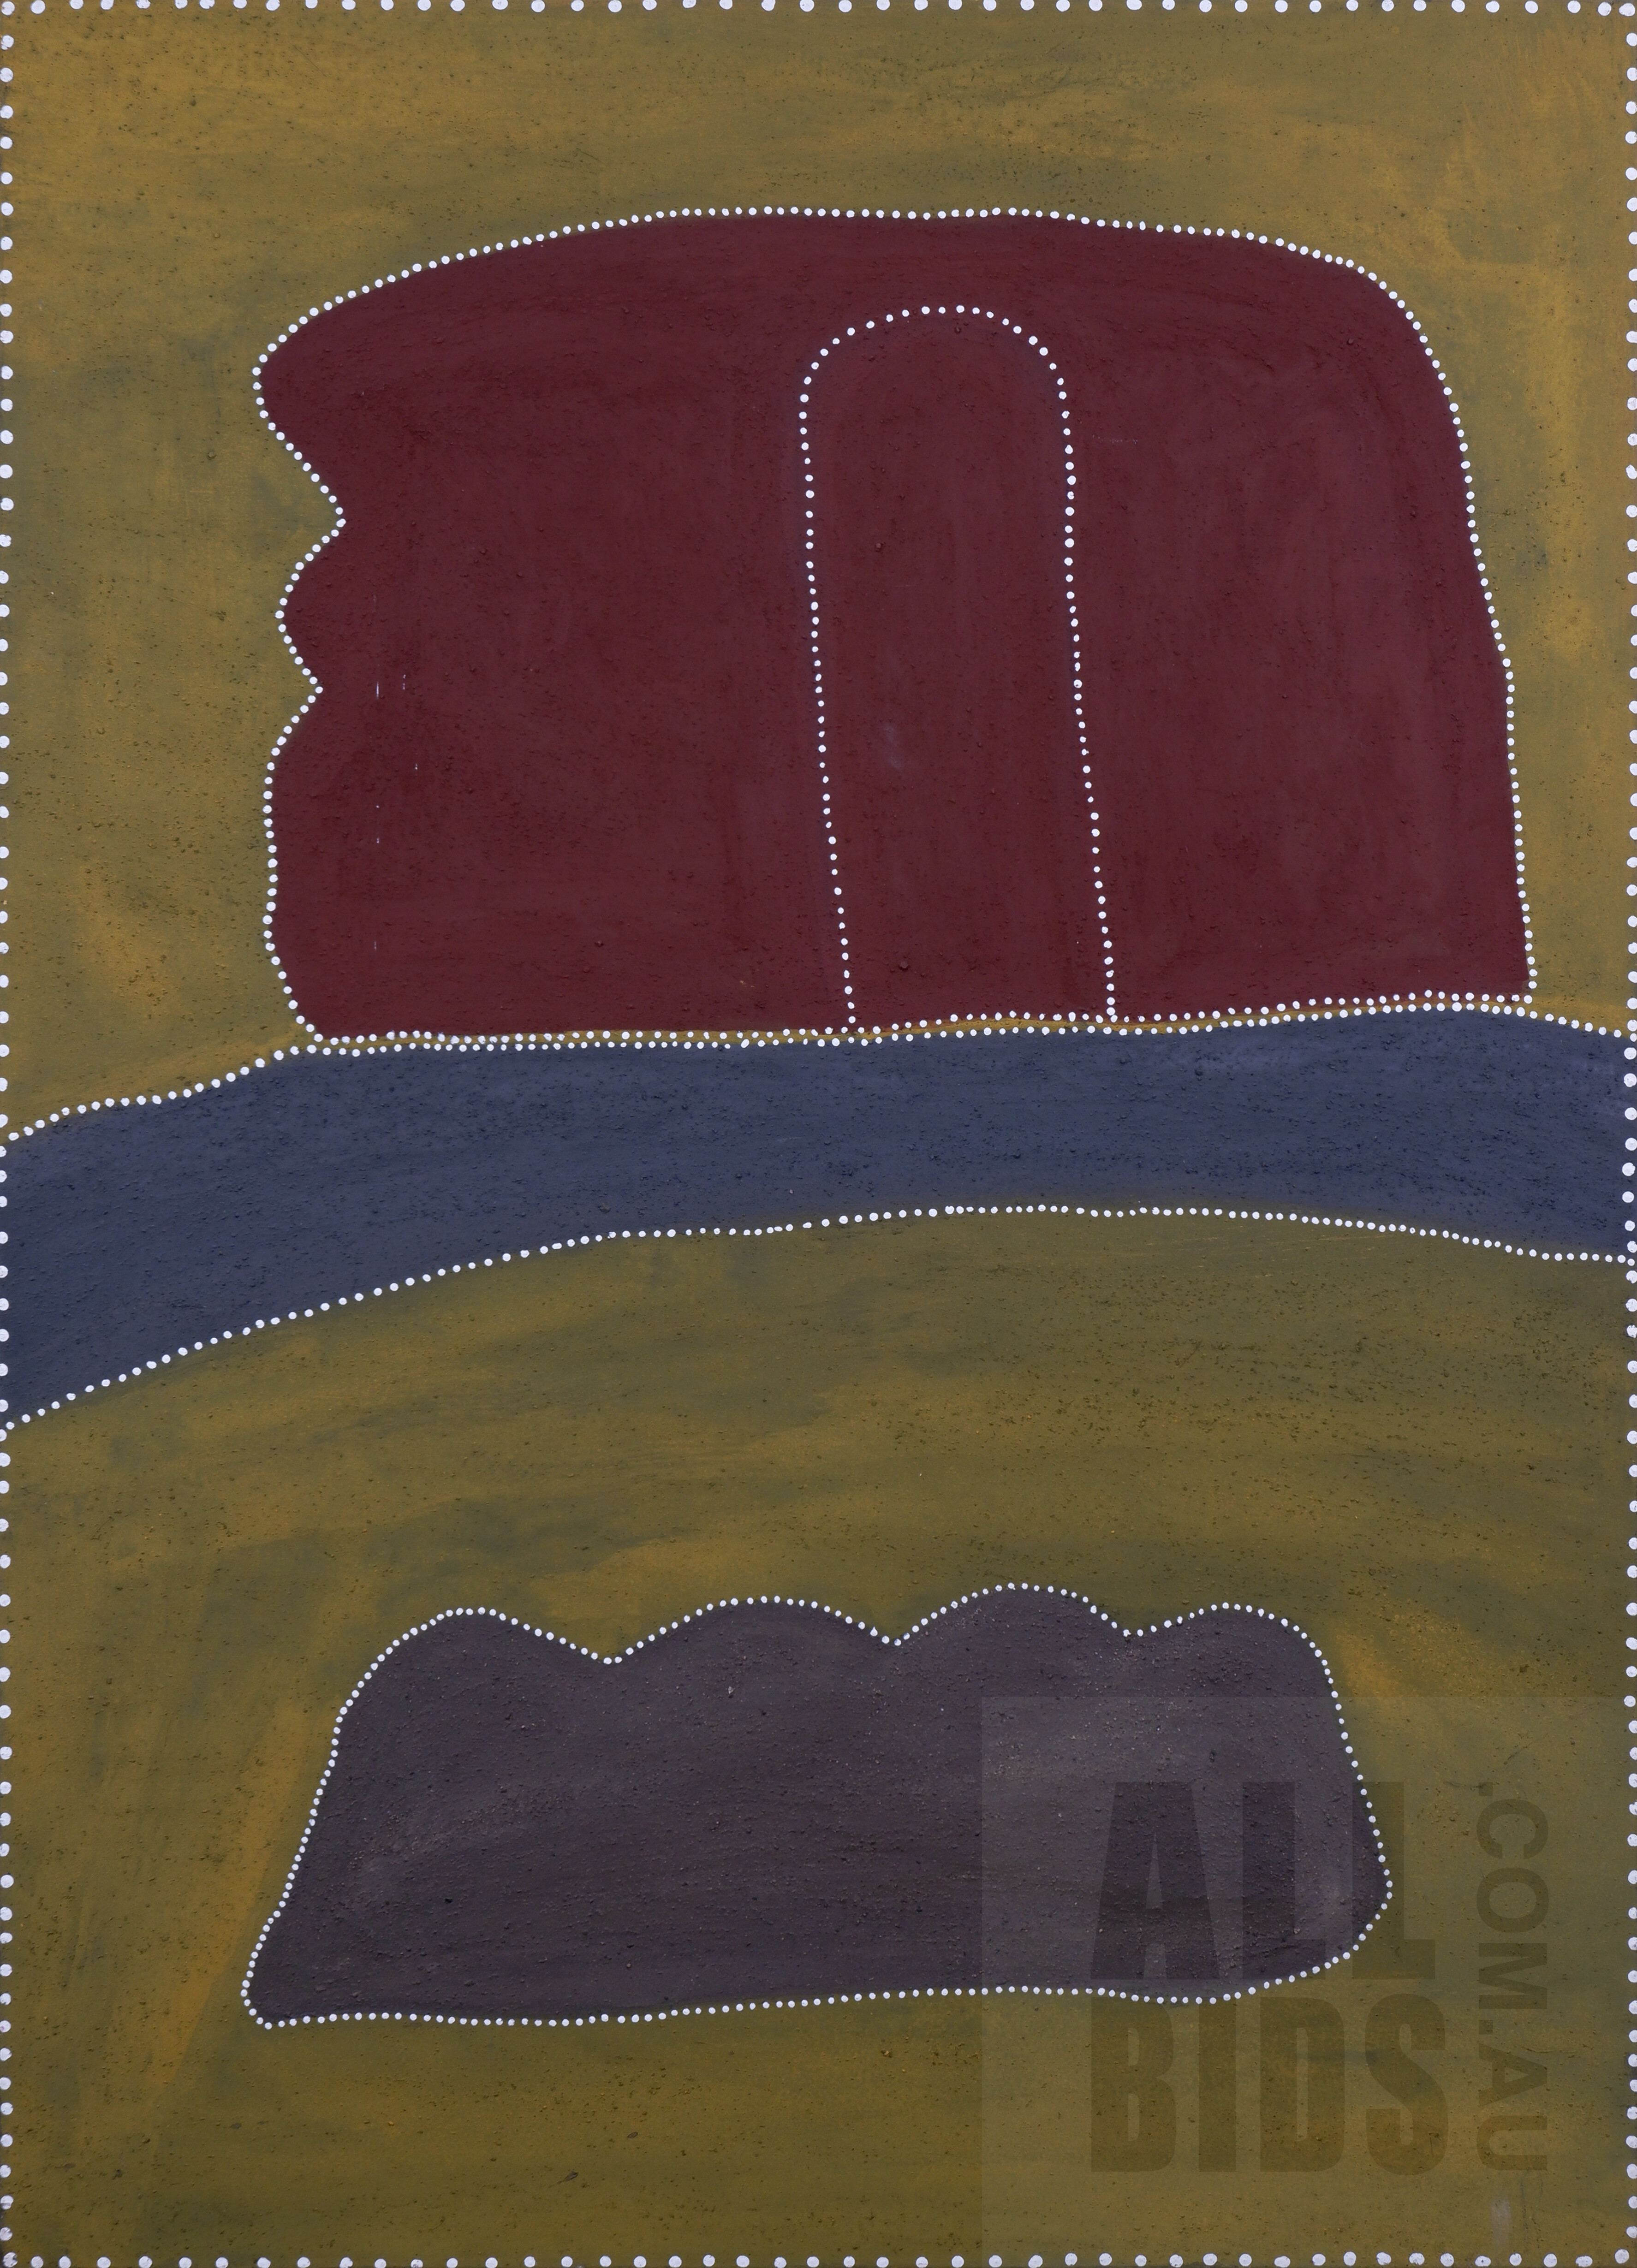 'Betty Carrington (born 1944, Gija language group), Red Butte & Dullo Country, Natural Ochre and Pigment on Canvas, 140 x 100 cm'